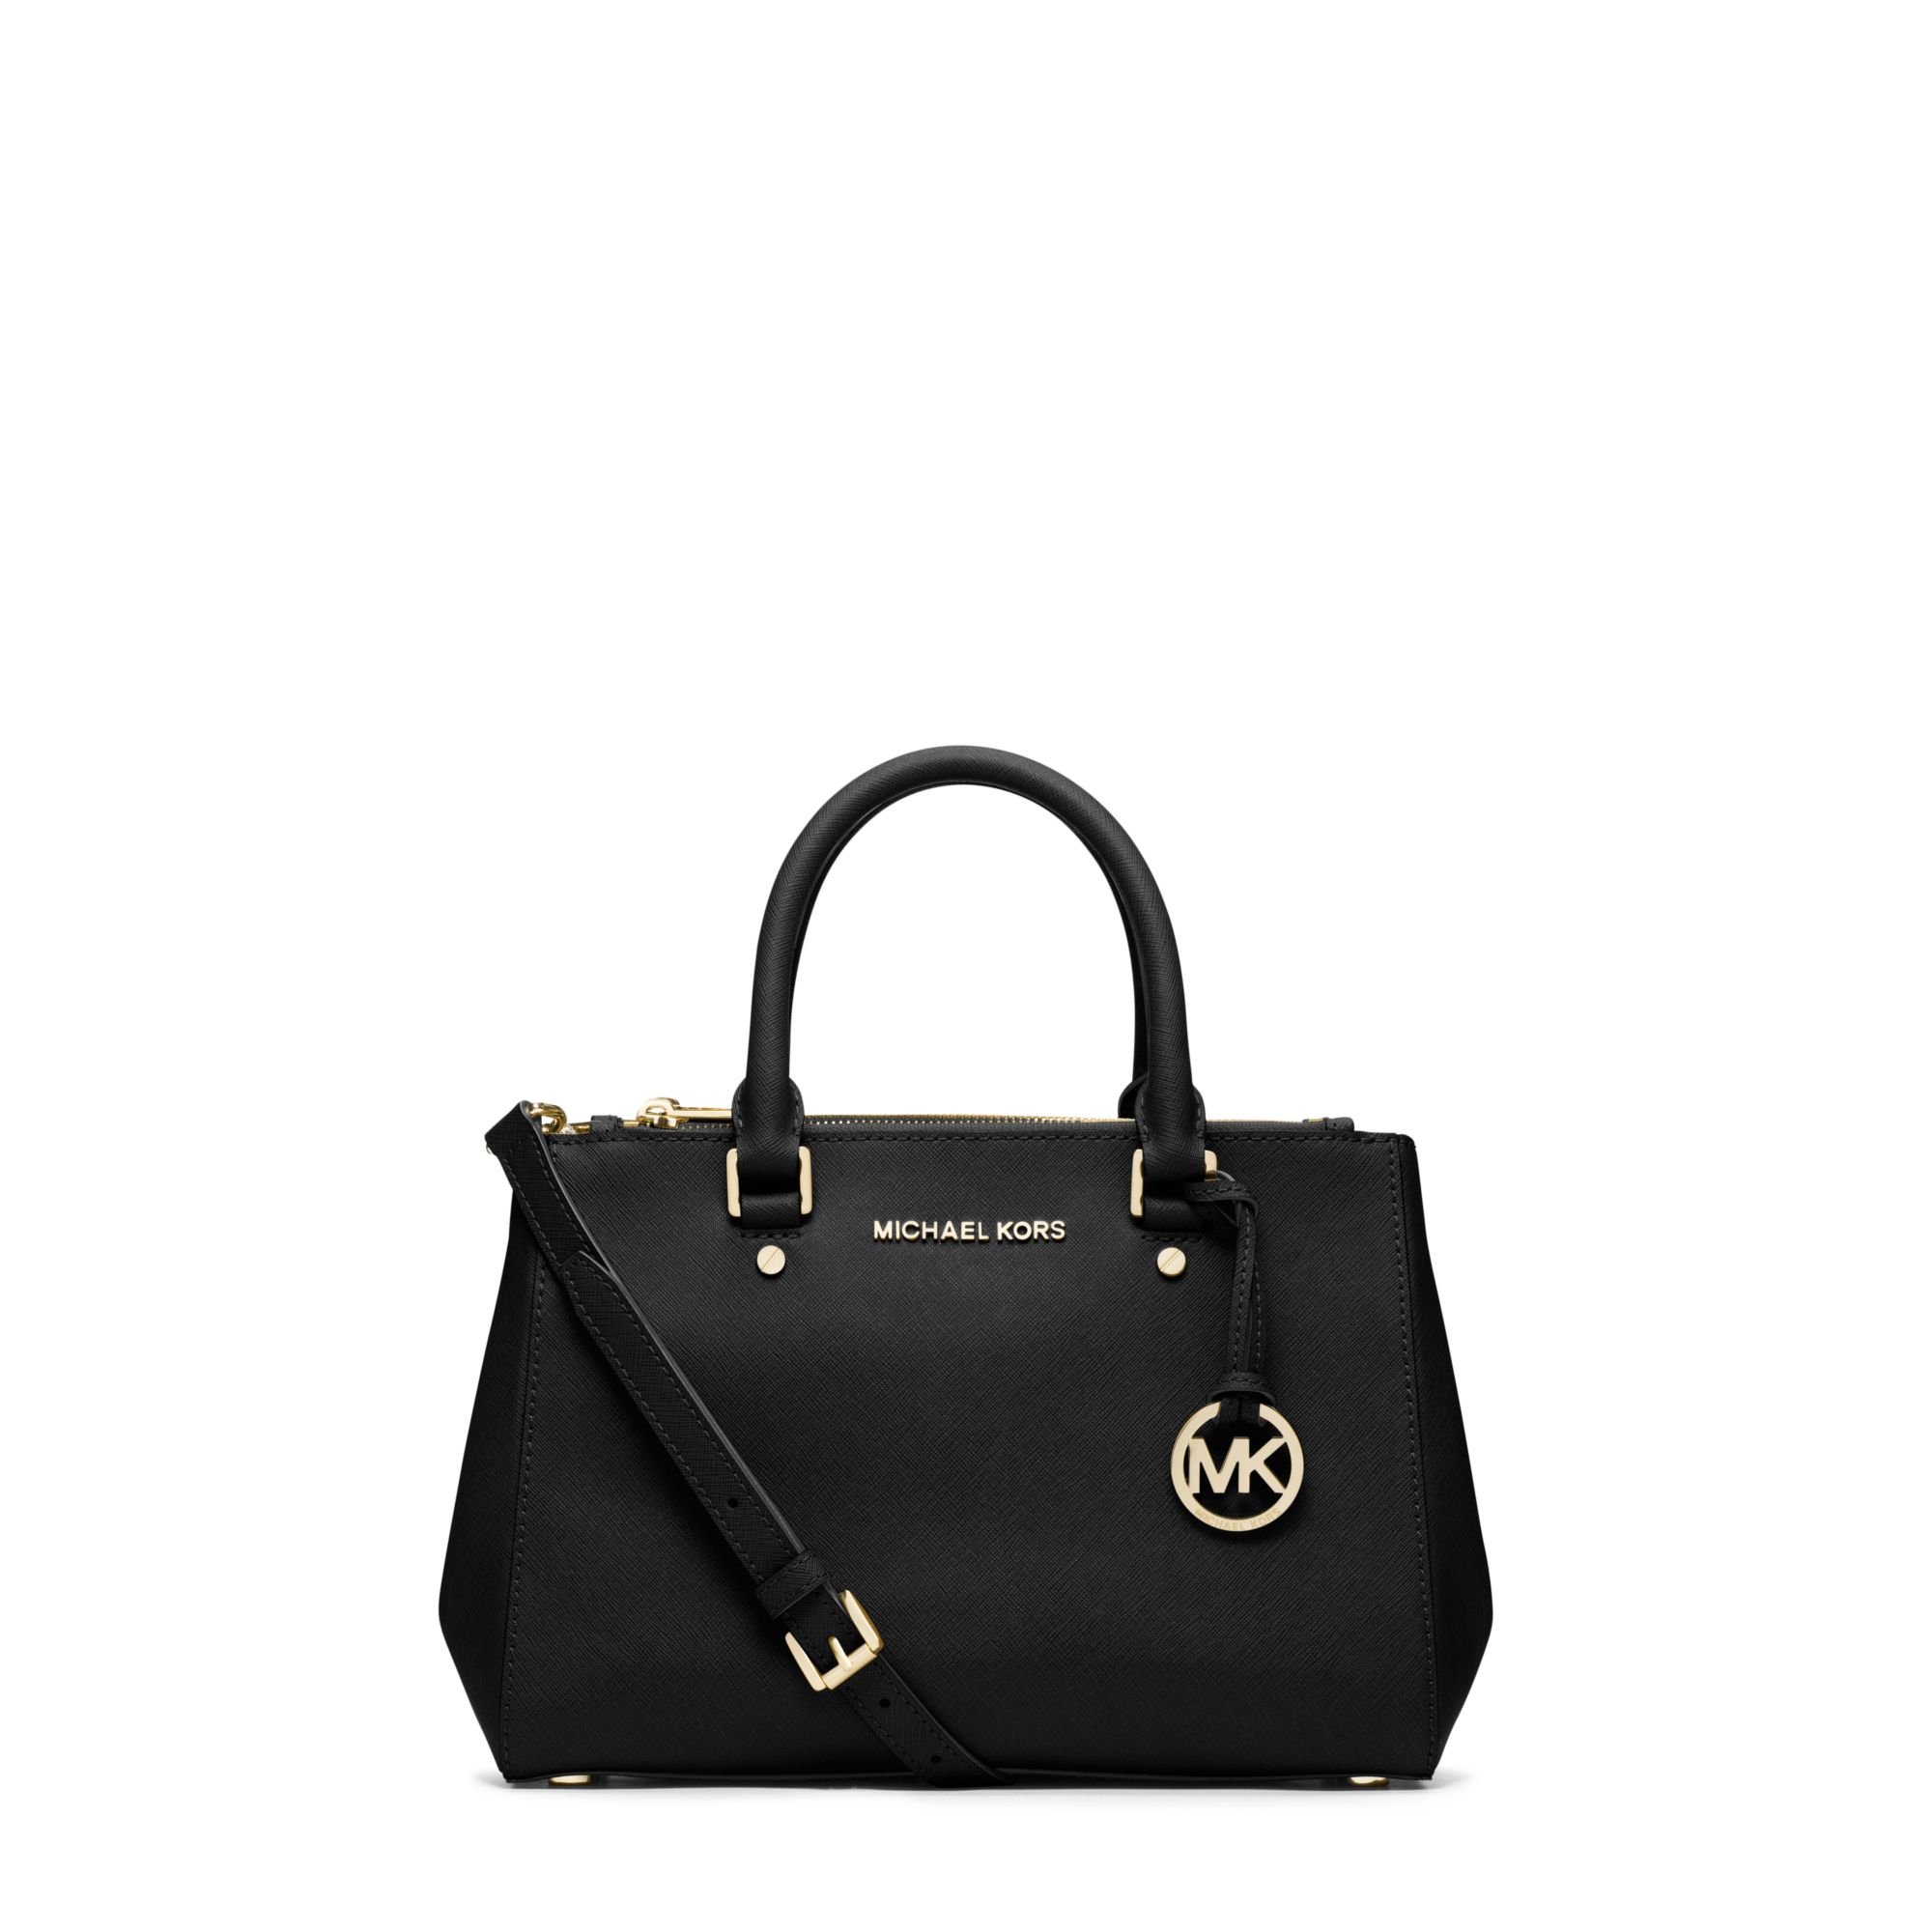 Lyst - Michael Kors Sutton Small Saffiano Leather Satchel in Black